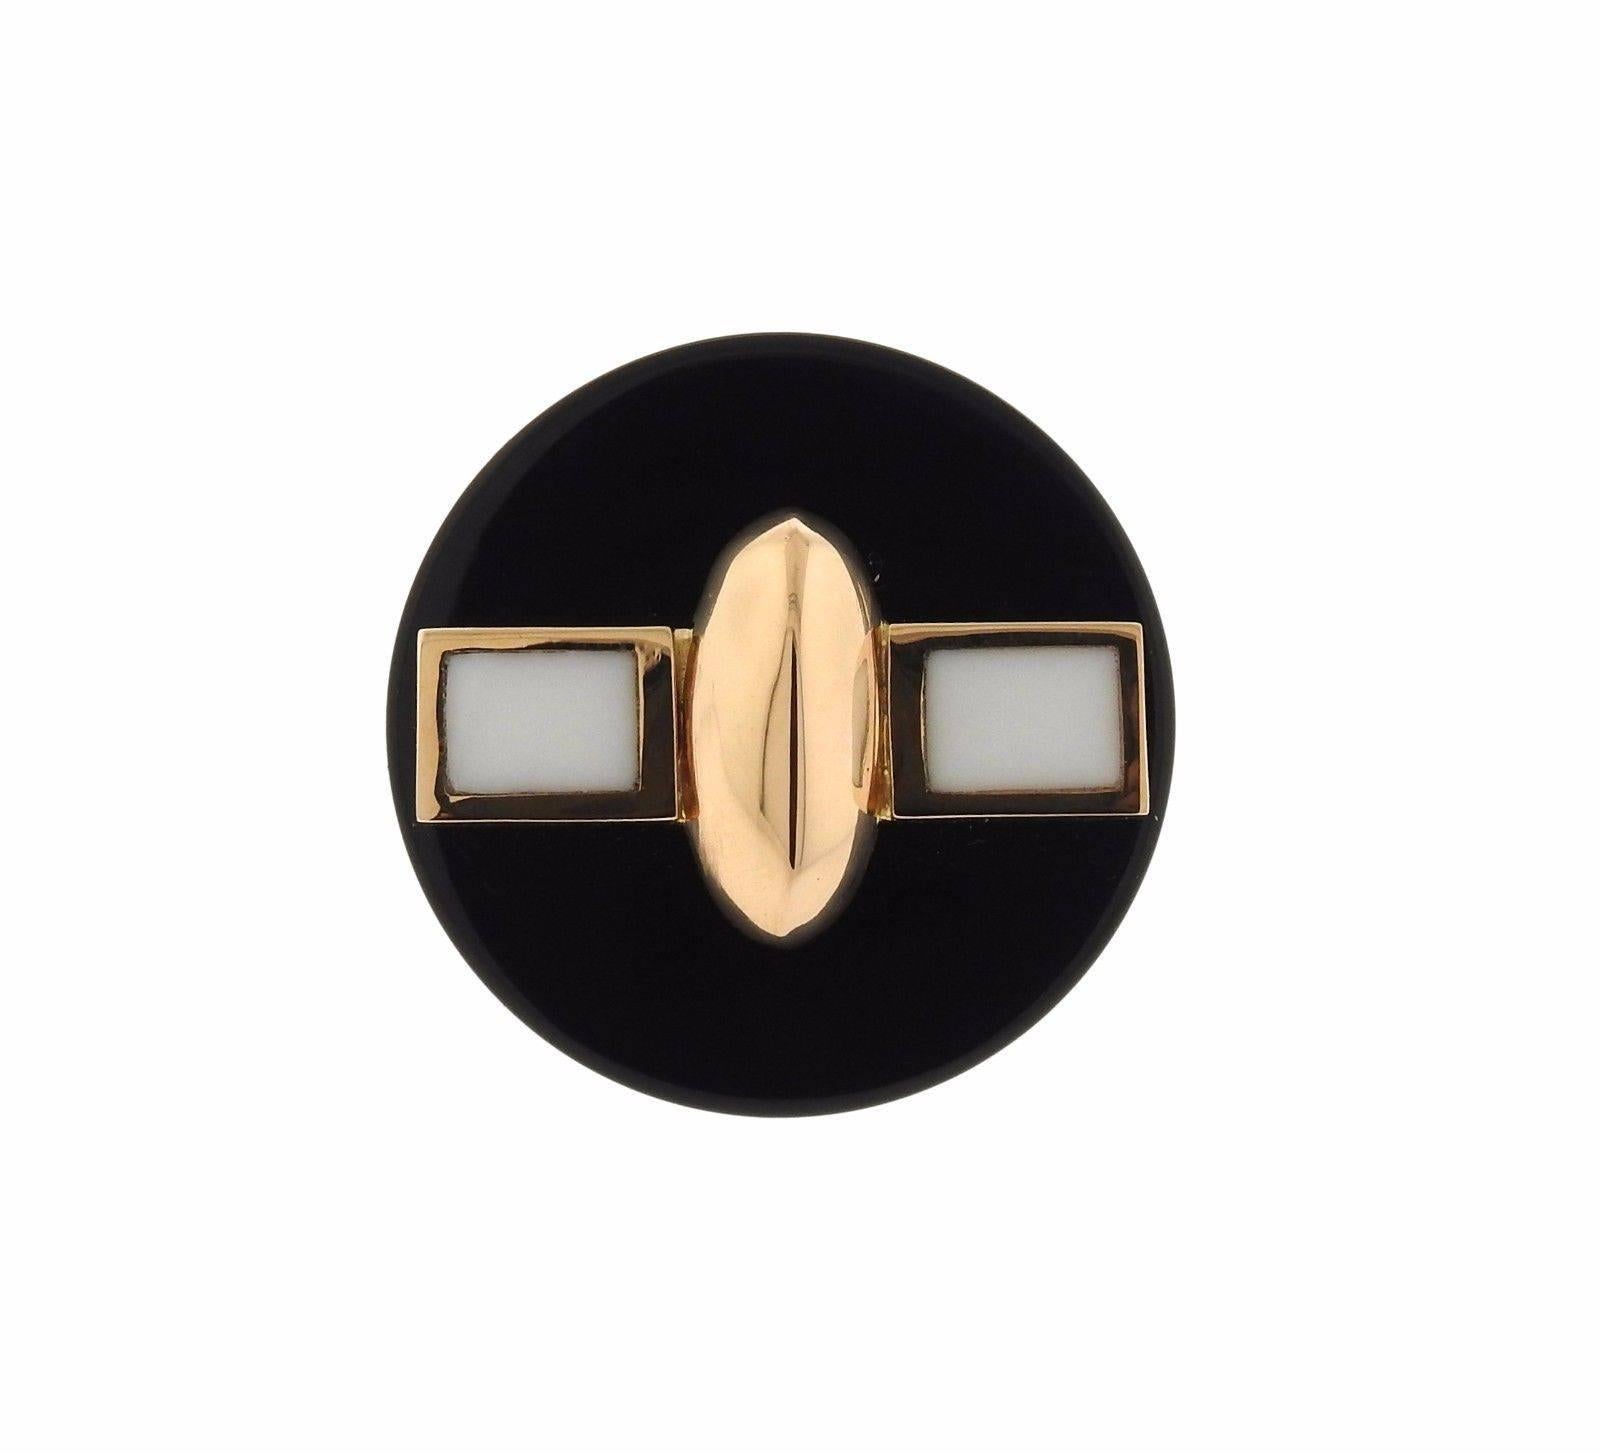 An 18k gold ring set with onyx.  The ring is a size 7.5 with the top measuring 37mm in diameter and sitting 16mm from the finger.  The weight of the piece is 33.9 grams. Marked: 750, G. Facchini.